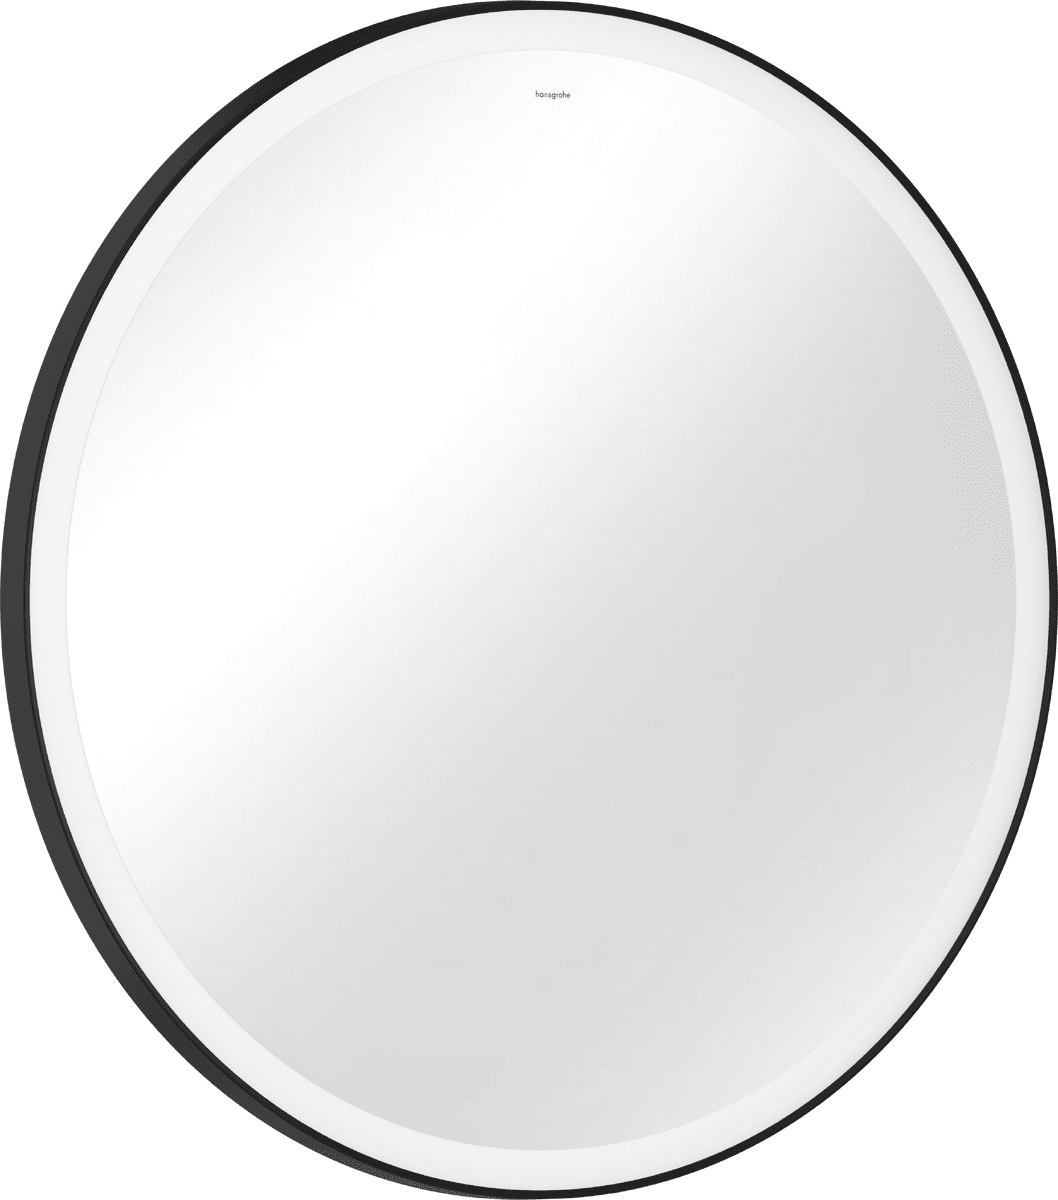 Picture of HANSGROHE Xarita Lite S Mirror with circular LED lights 900/30 wall switch #54967670 - Matt Black